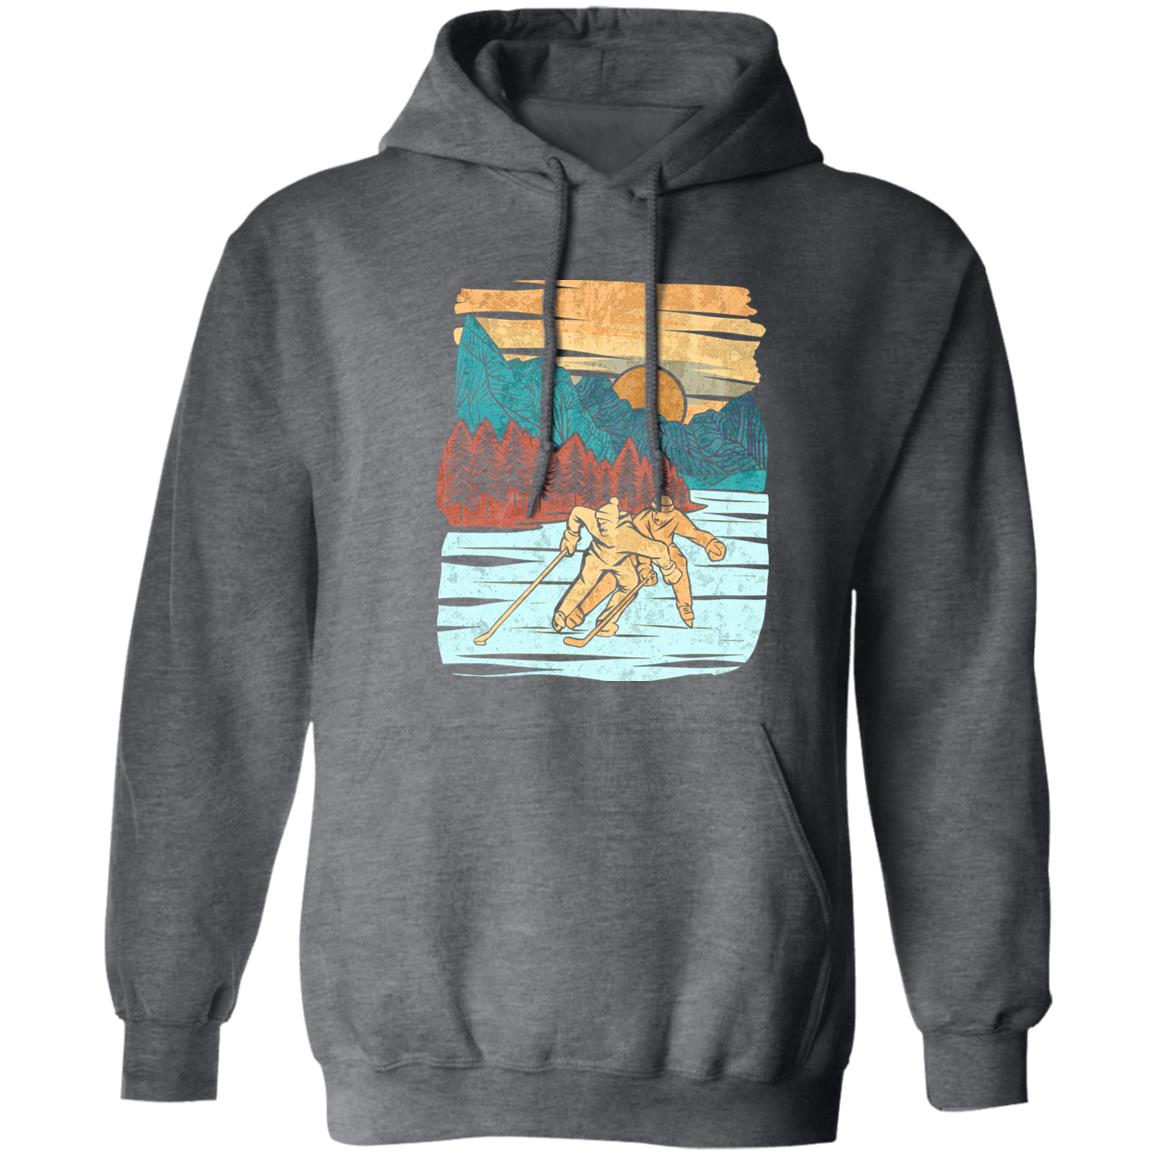 Pond Hockey Pullover Hoodie 8 oz (Closeout)